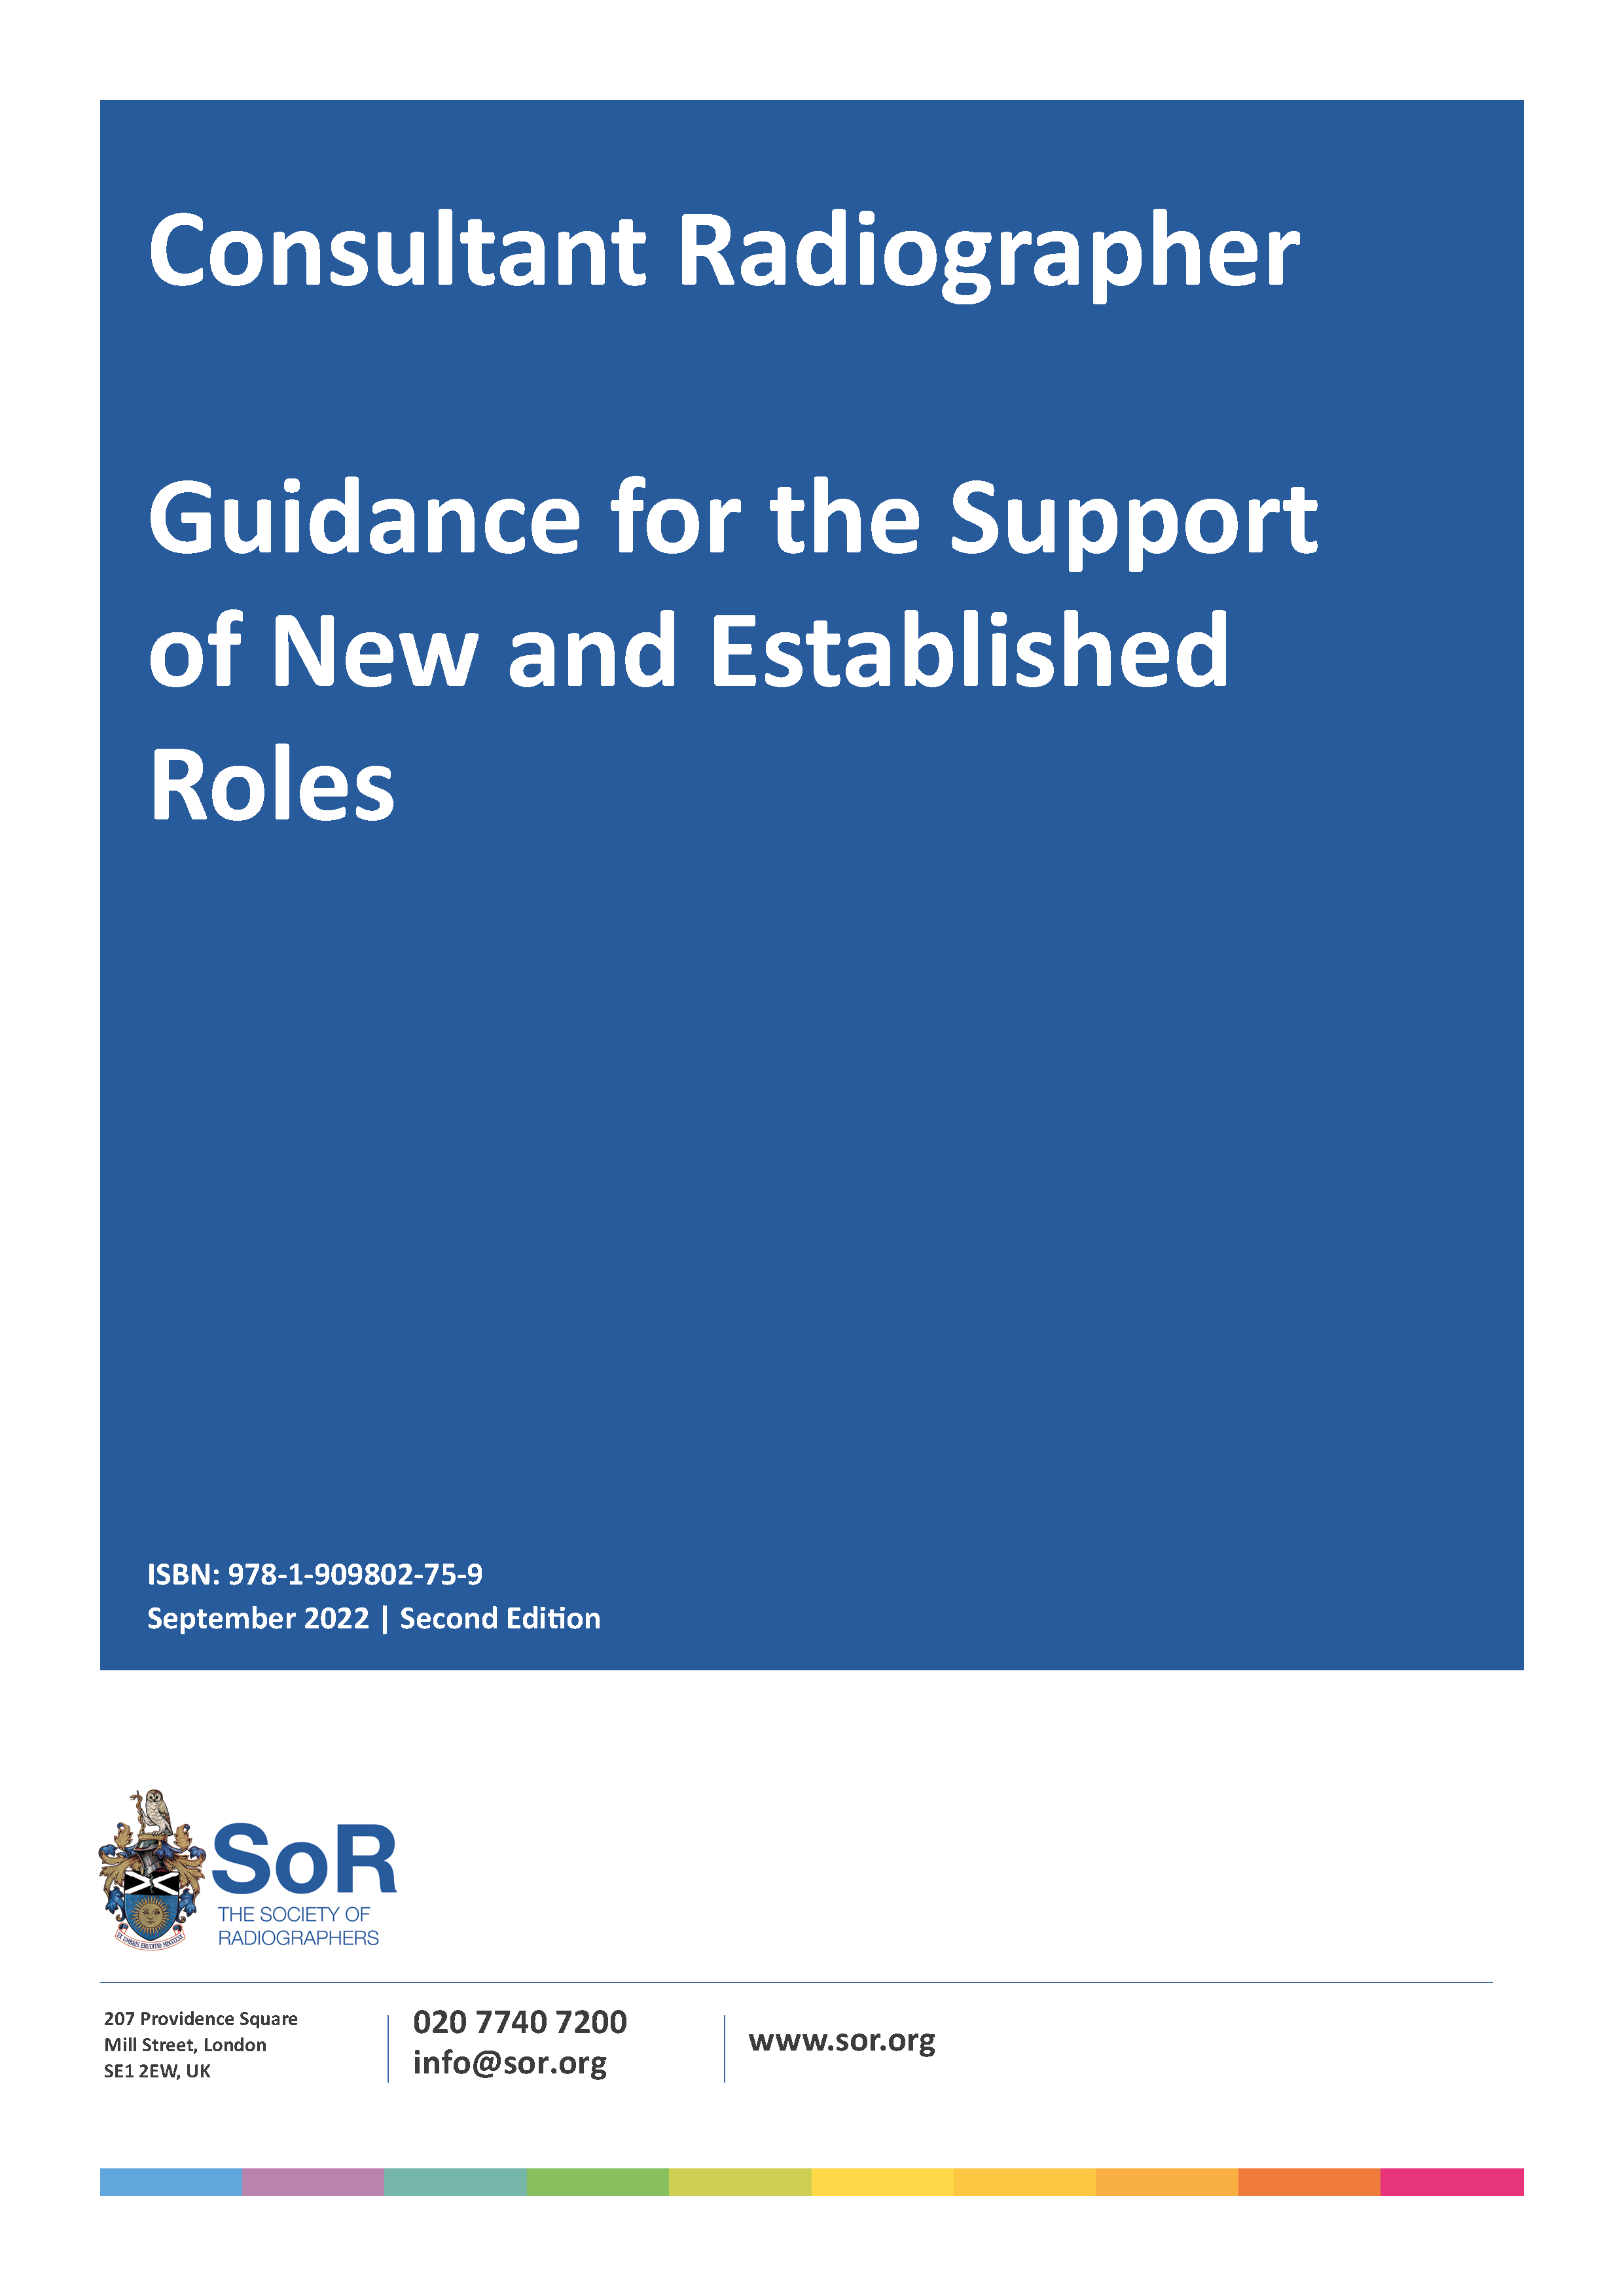 Consultant Radiographer – Guidance for the Support of New and Established Roles (second edition)